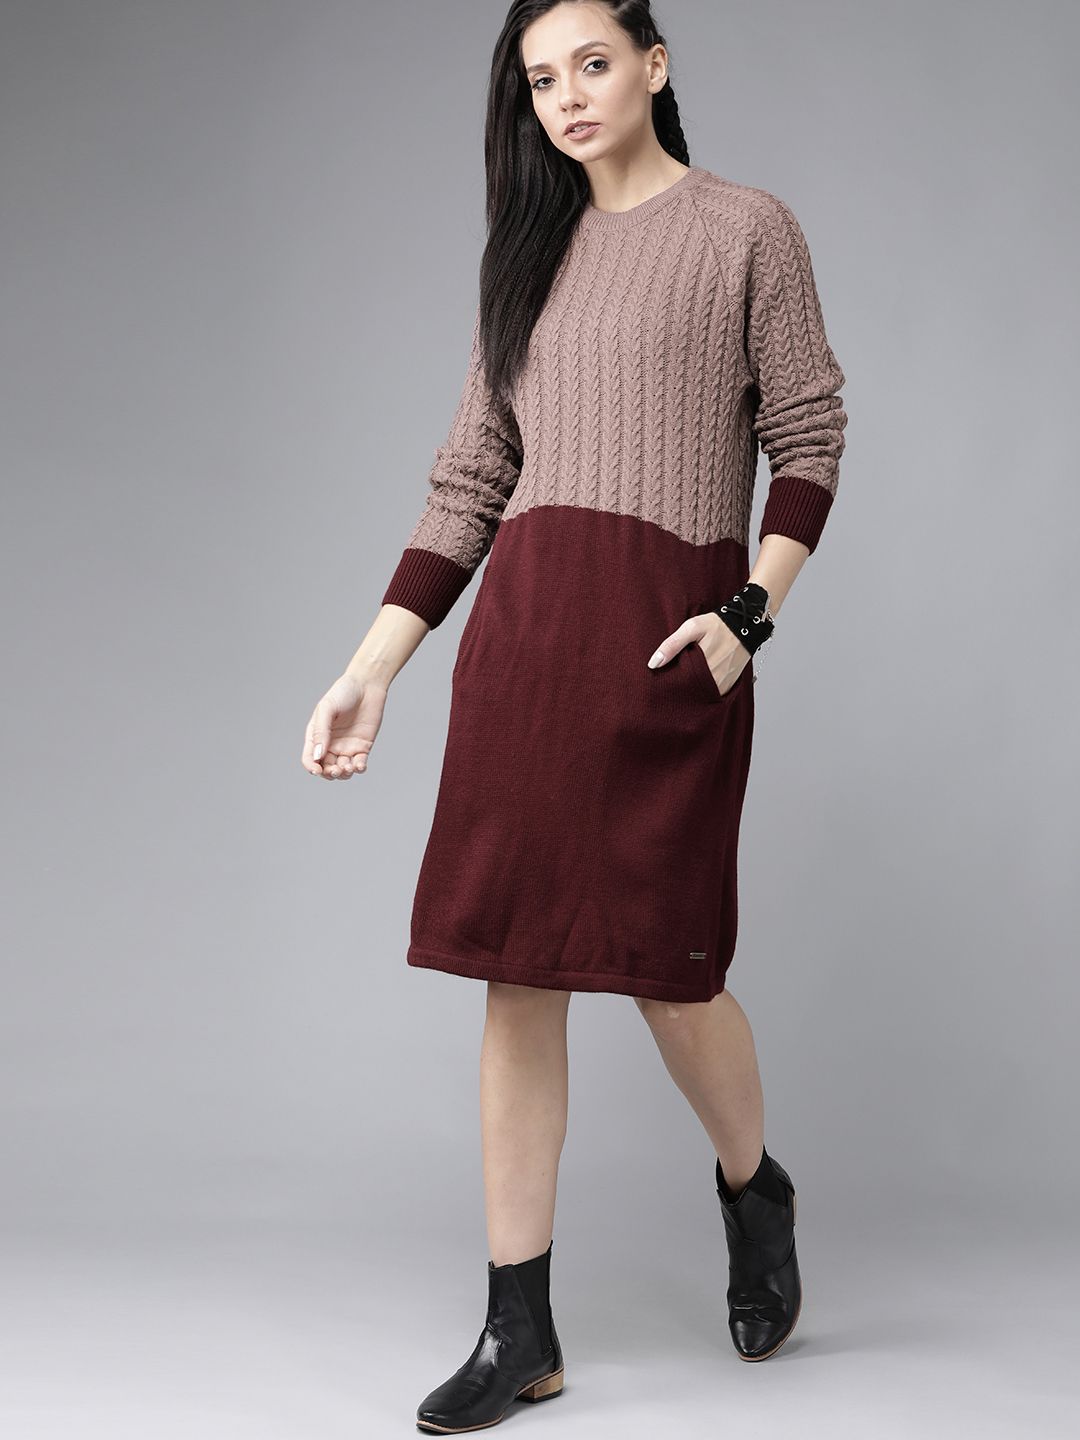 Roadster Women Mauve & Burgundy Colourblocked Cable Knit Jumper Dress Price in India